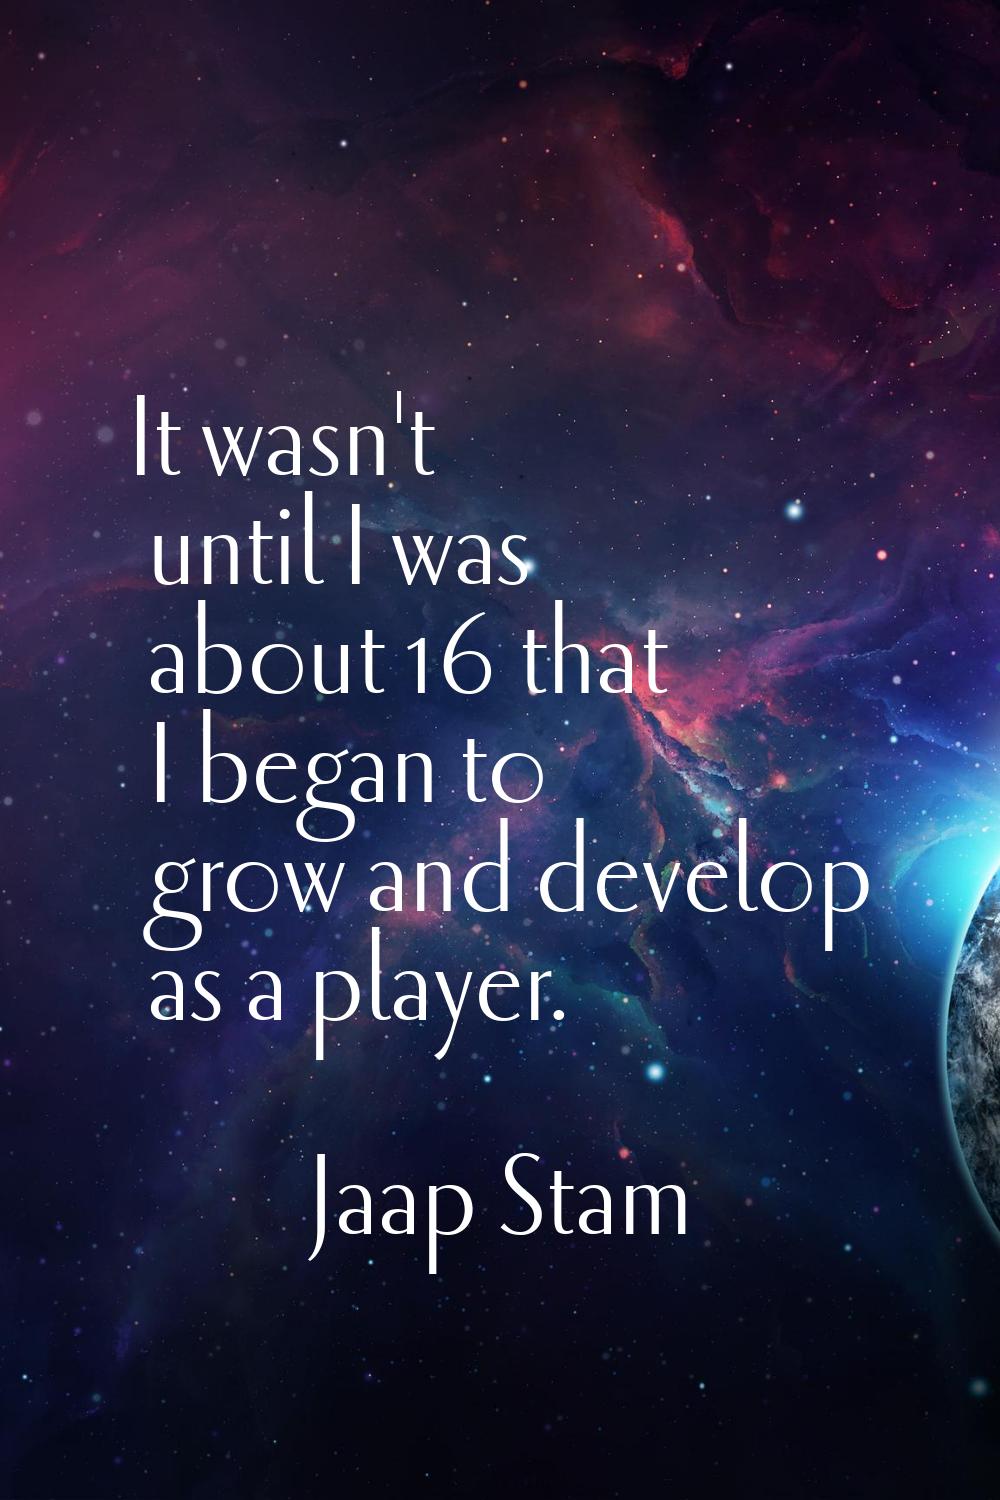 It wasn't until I was about 16 that I began to grow and develop as a player.